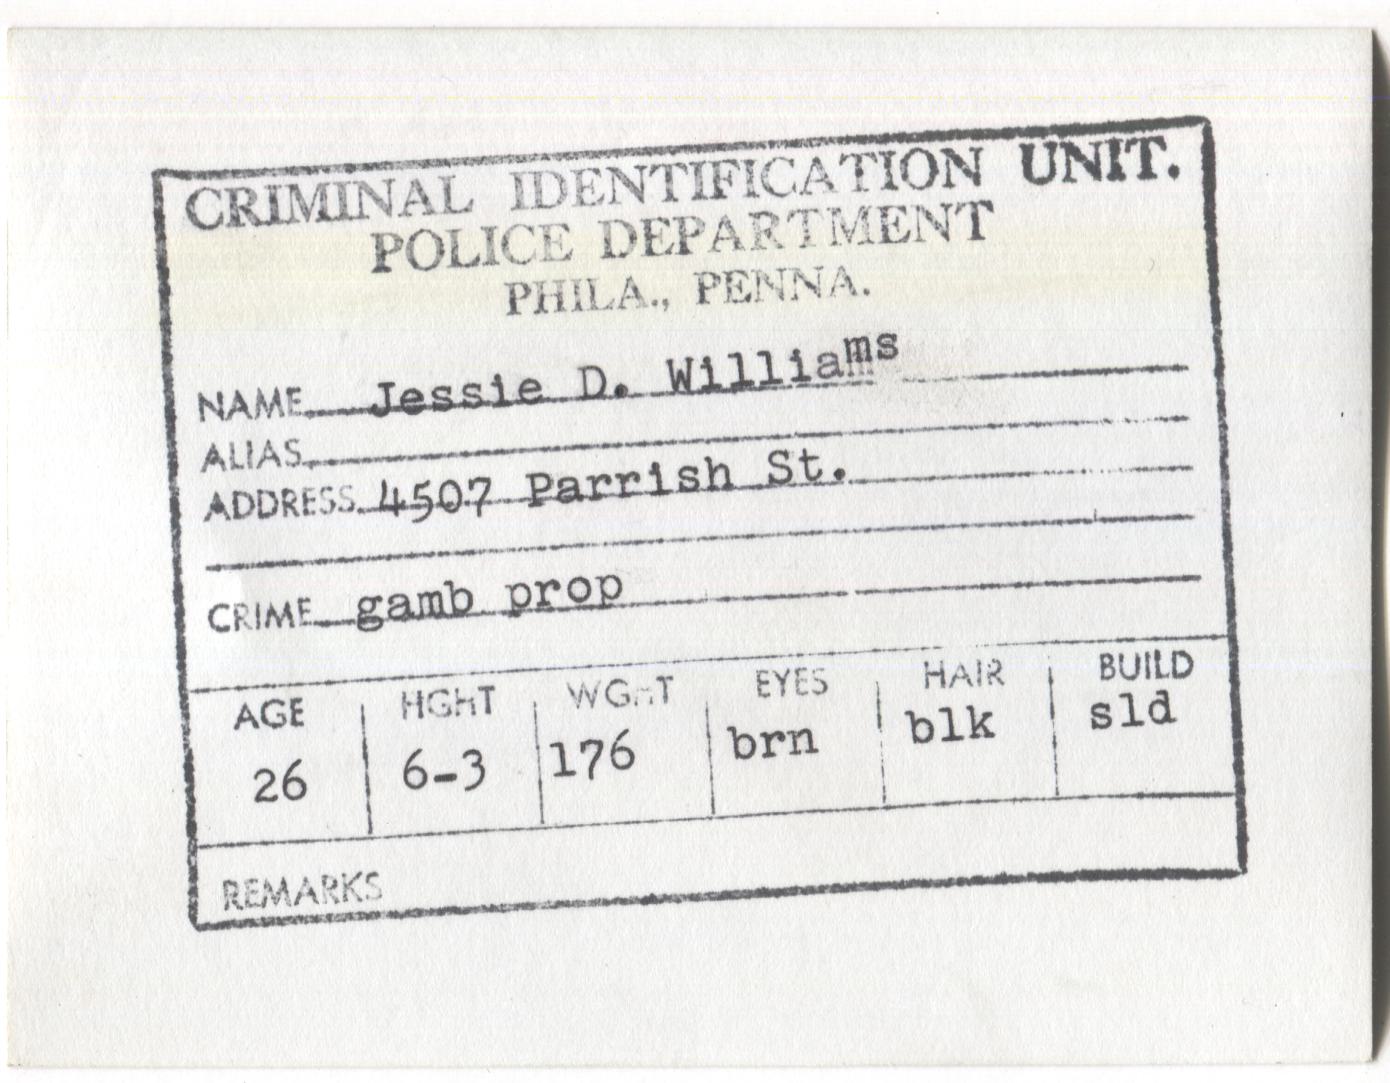 Jessie D. Williams Mugshot - Arrested on 2/14/1963 for Being a Gambling Proprieter